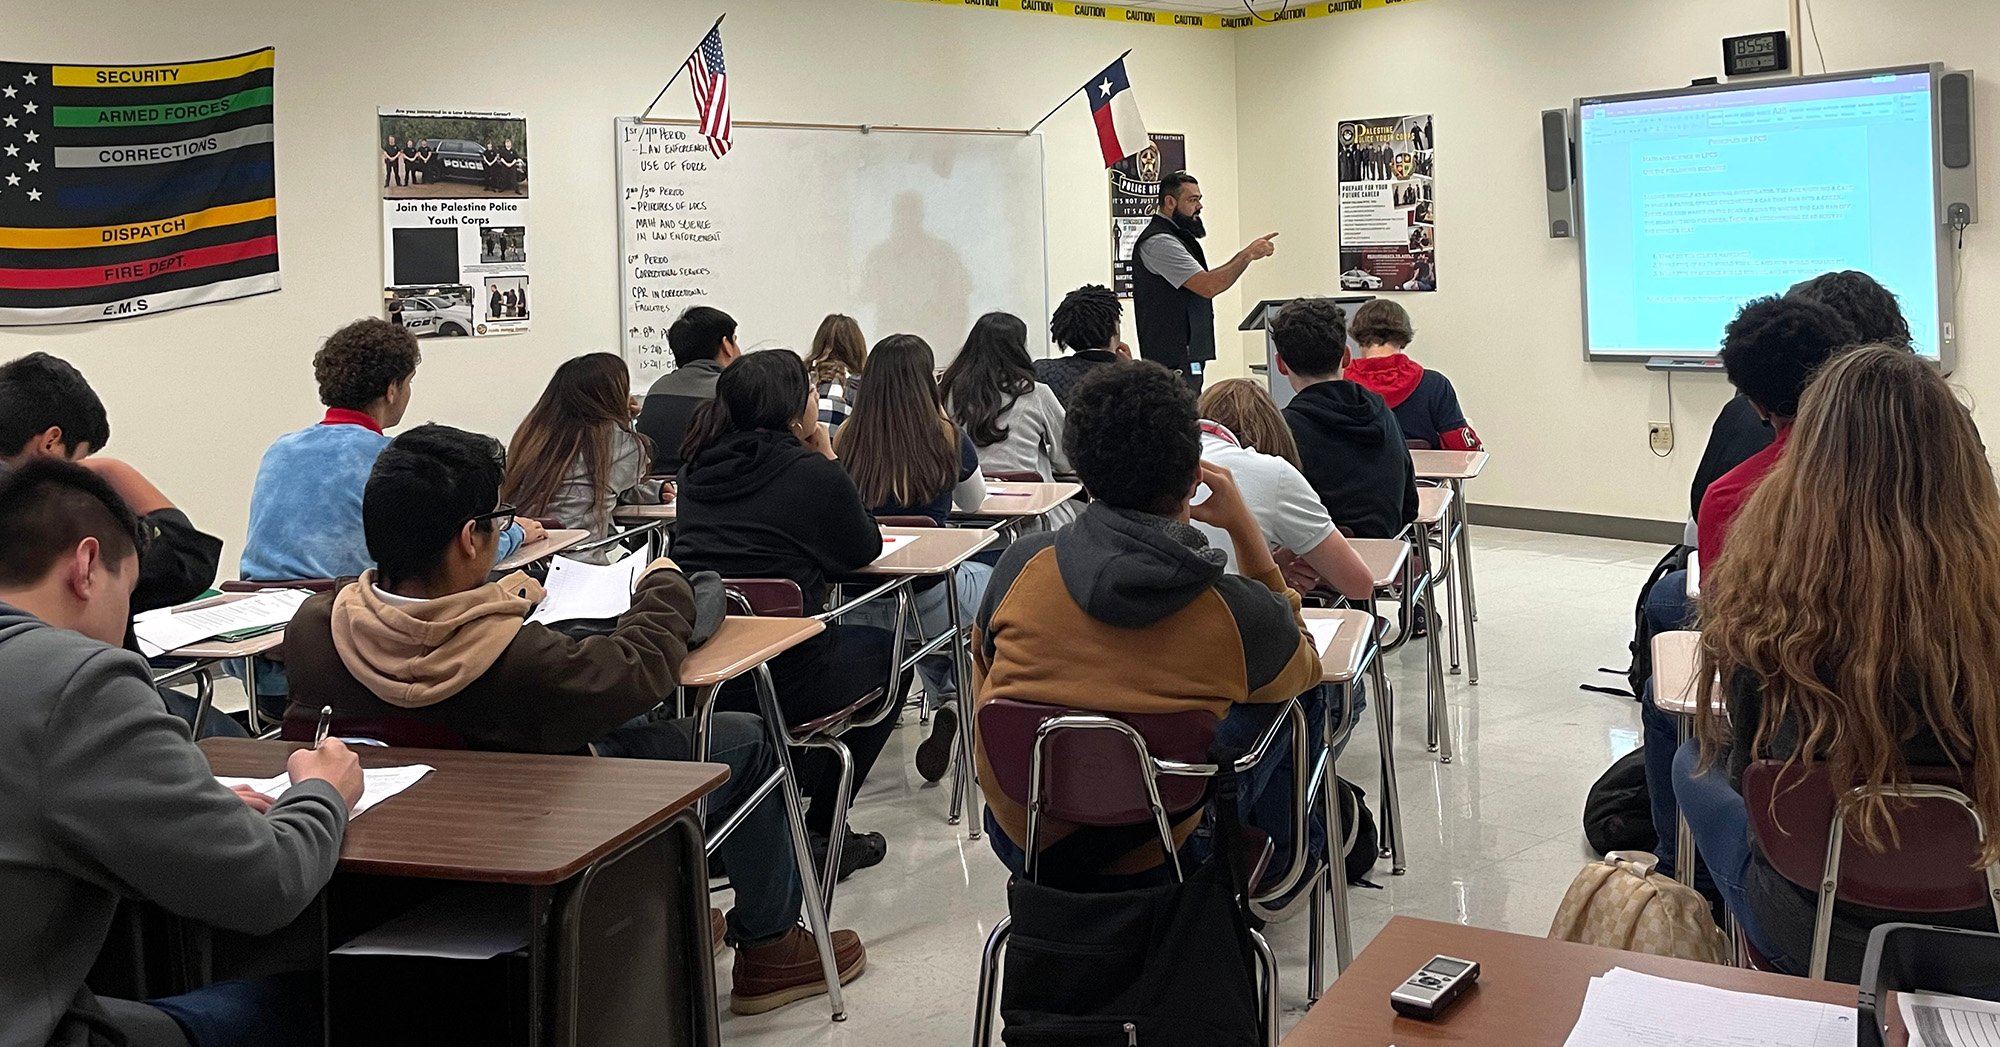 A teacher with a beard lectures a classroom of high school students about law enforcement and prison careers, in front of a powerpoint presentation. Pro-prison and law enforcement posters and a law enforcement flag cover the walls.